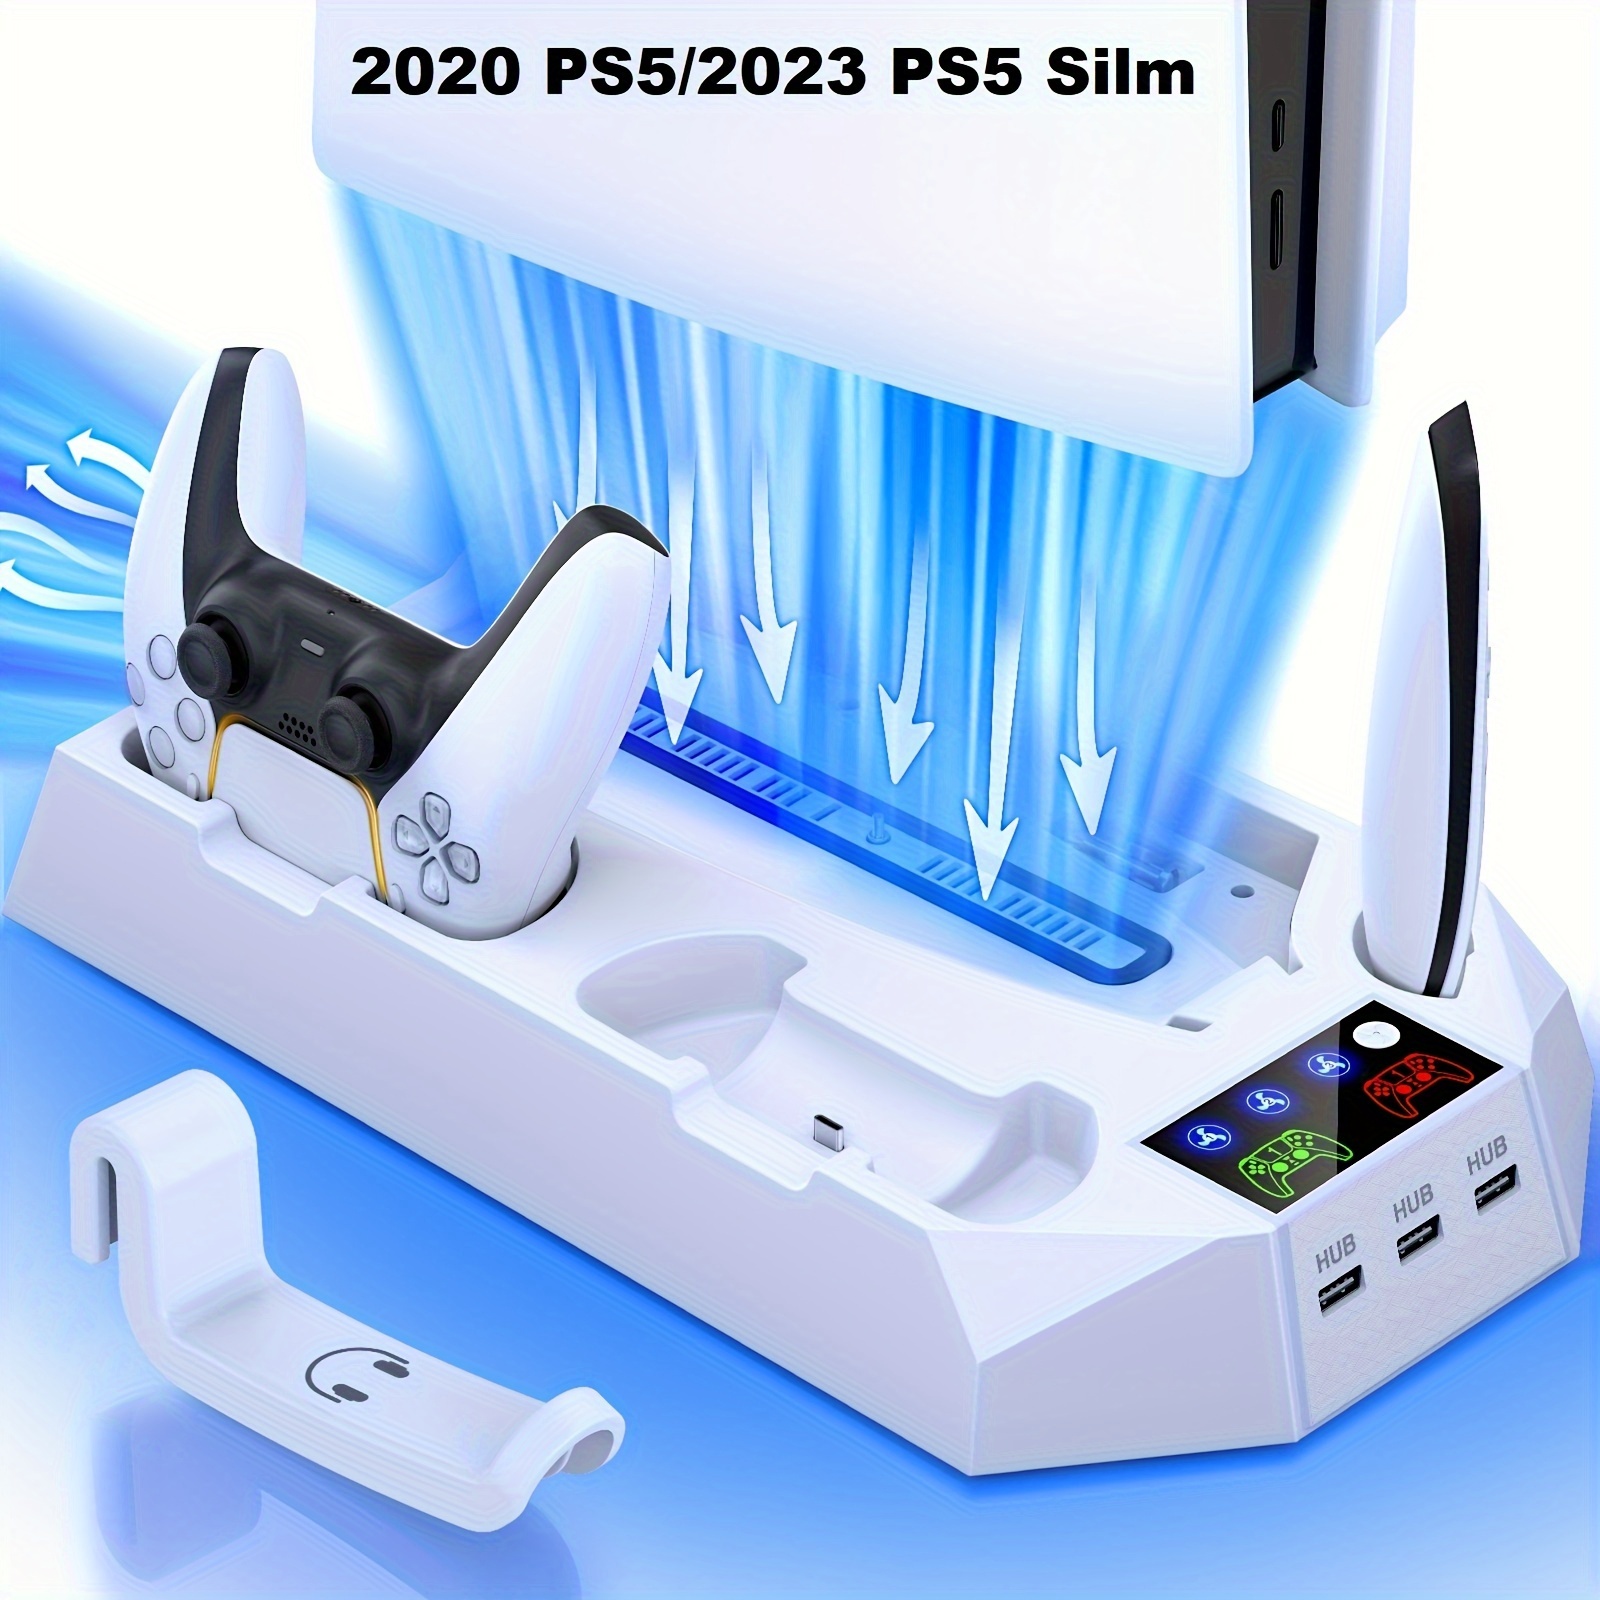 

For Ps5 Stand With Dual Charging Station Compatible With 2020 Ps5 And 2023 Ps5 Silm Console With Led Indicator, 3 Usb Port, Smart Charging Protection, Fast Charging Function, White